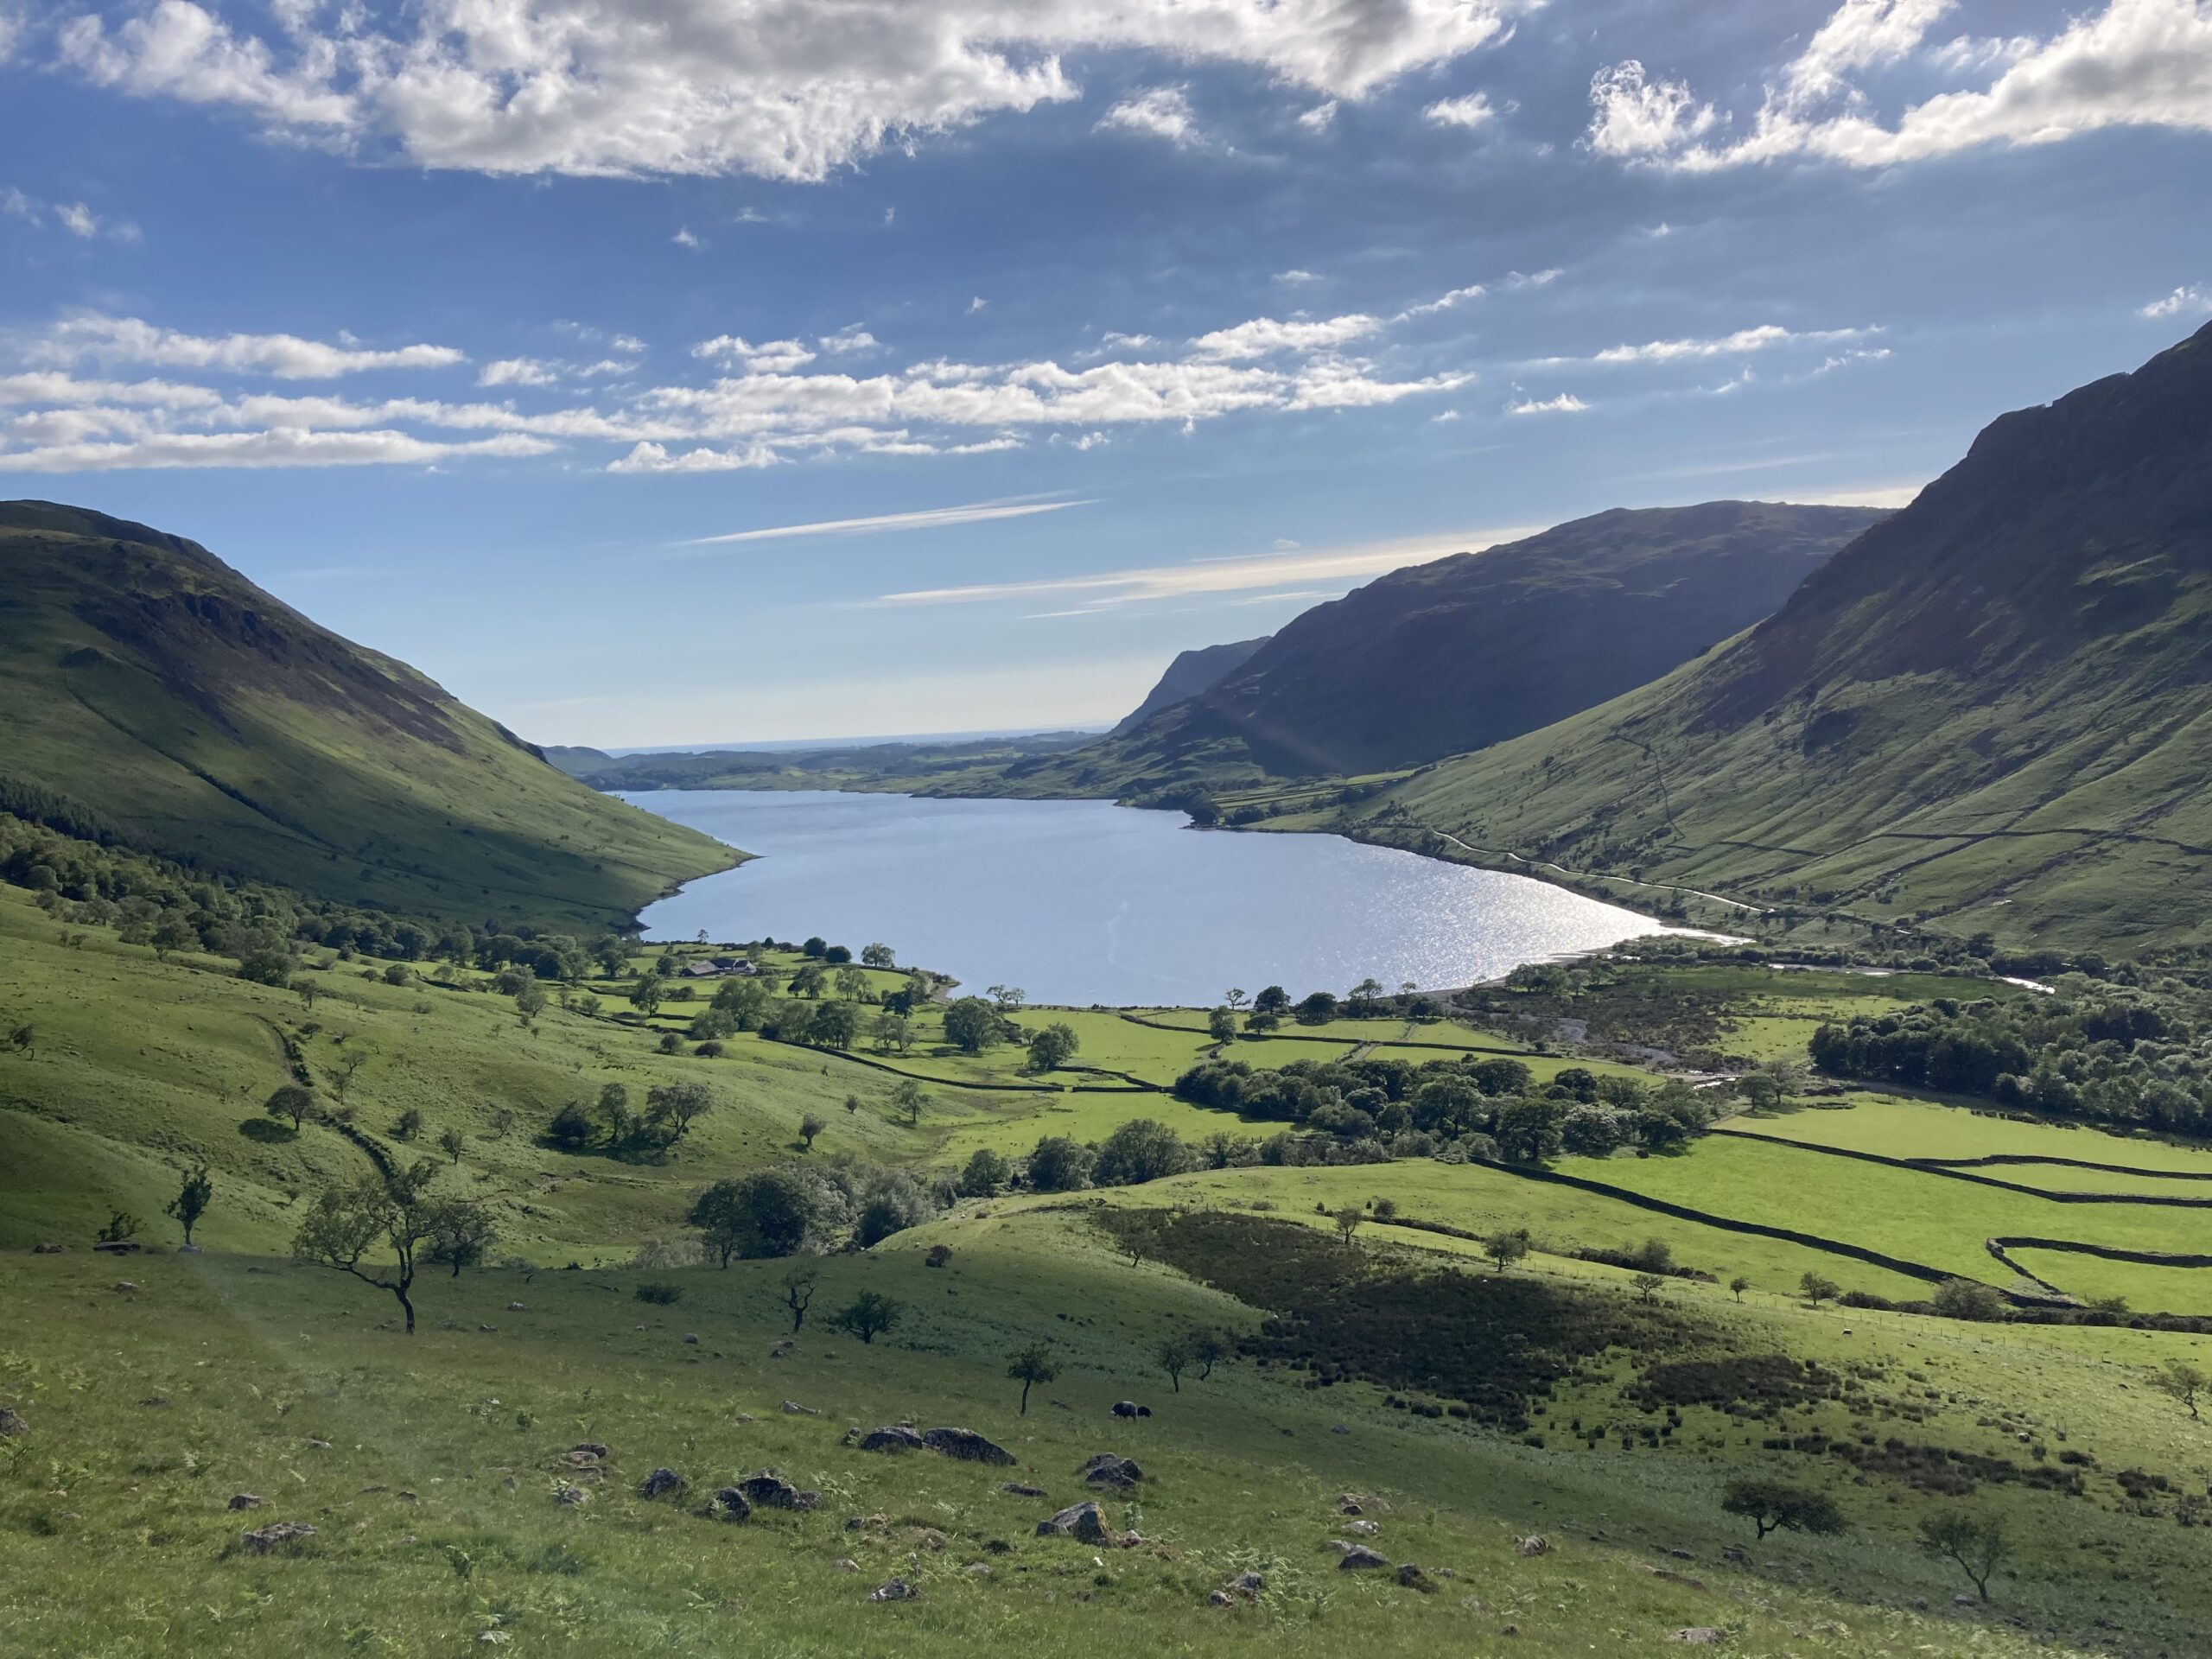 Wastwater, England's deepest lake